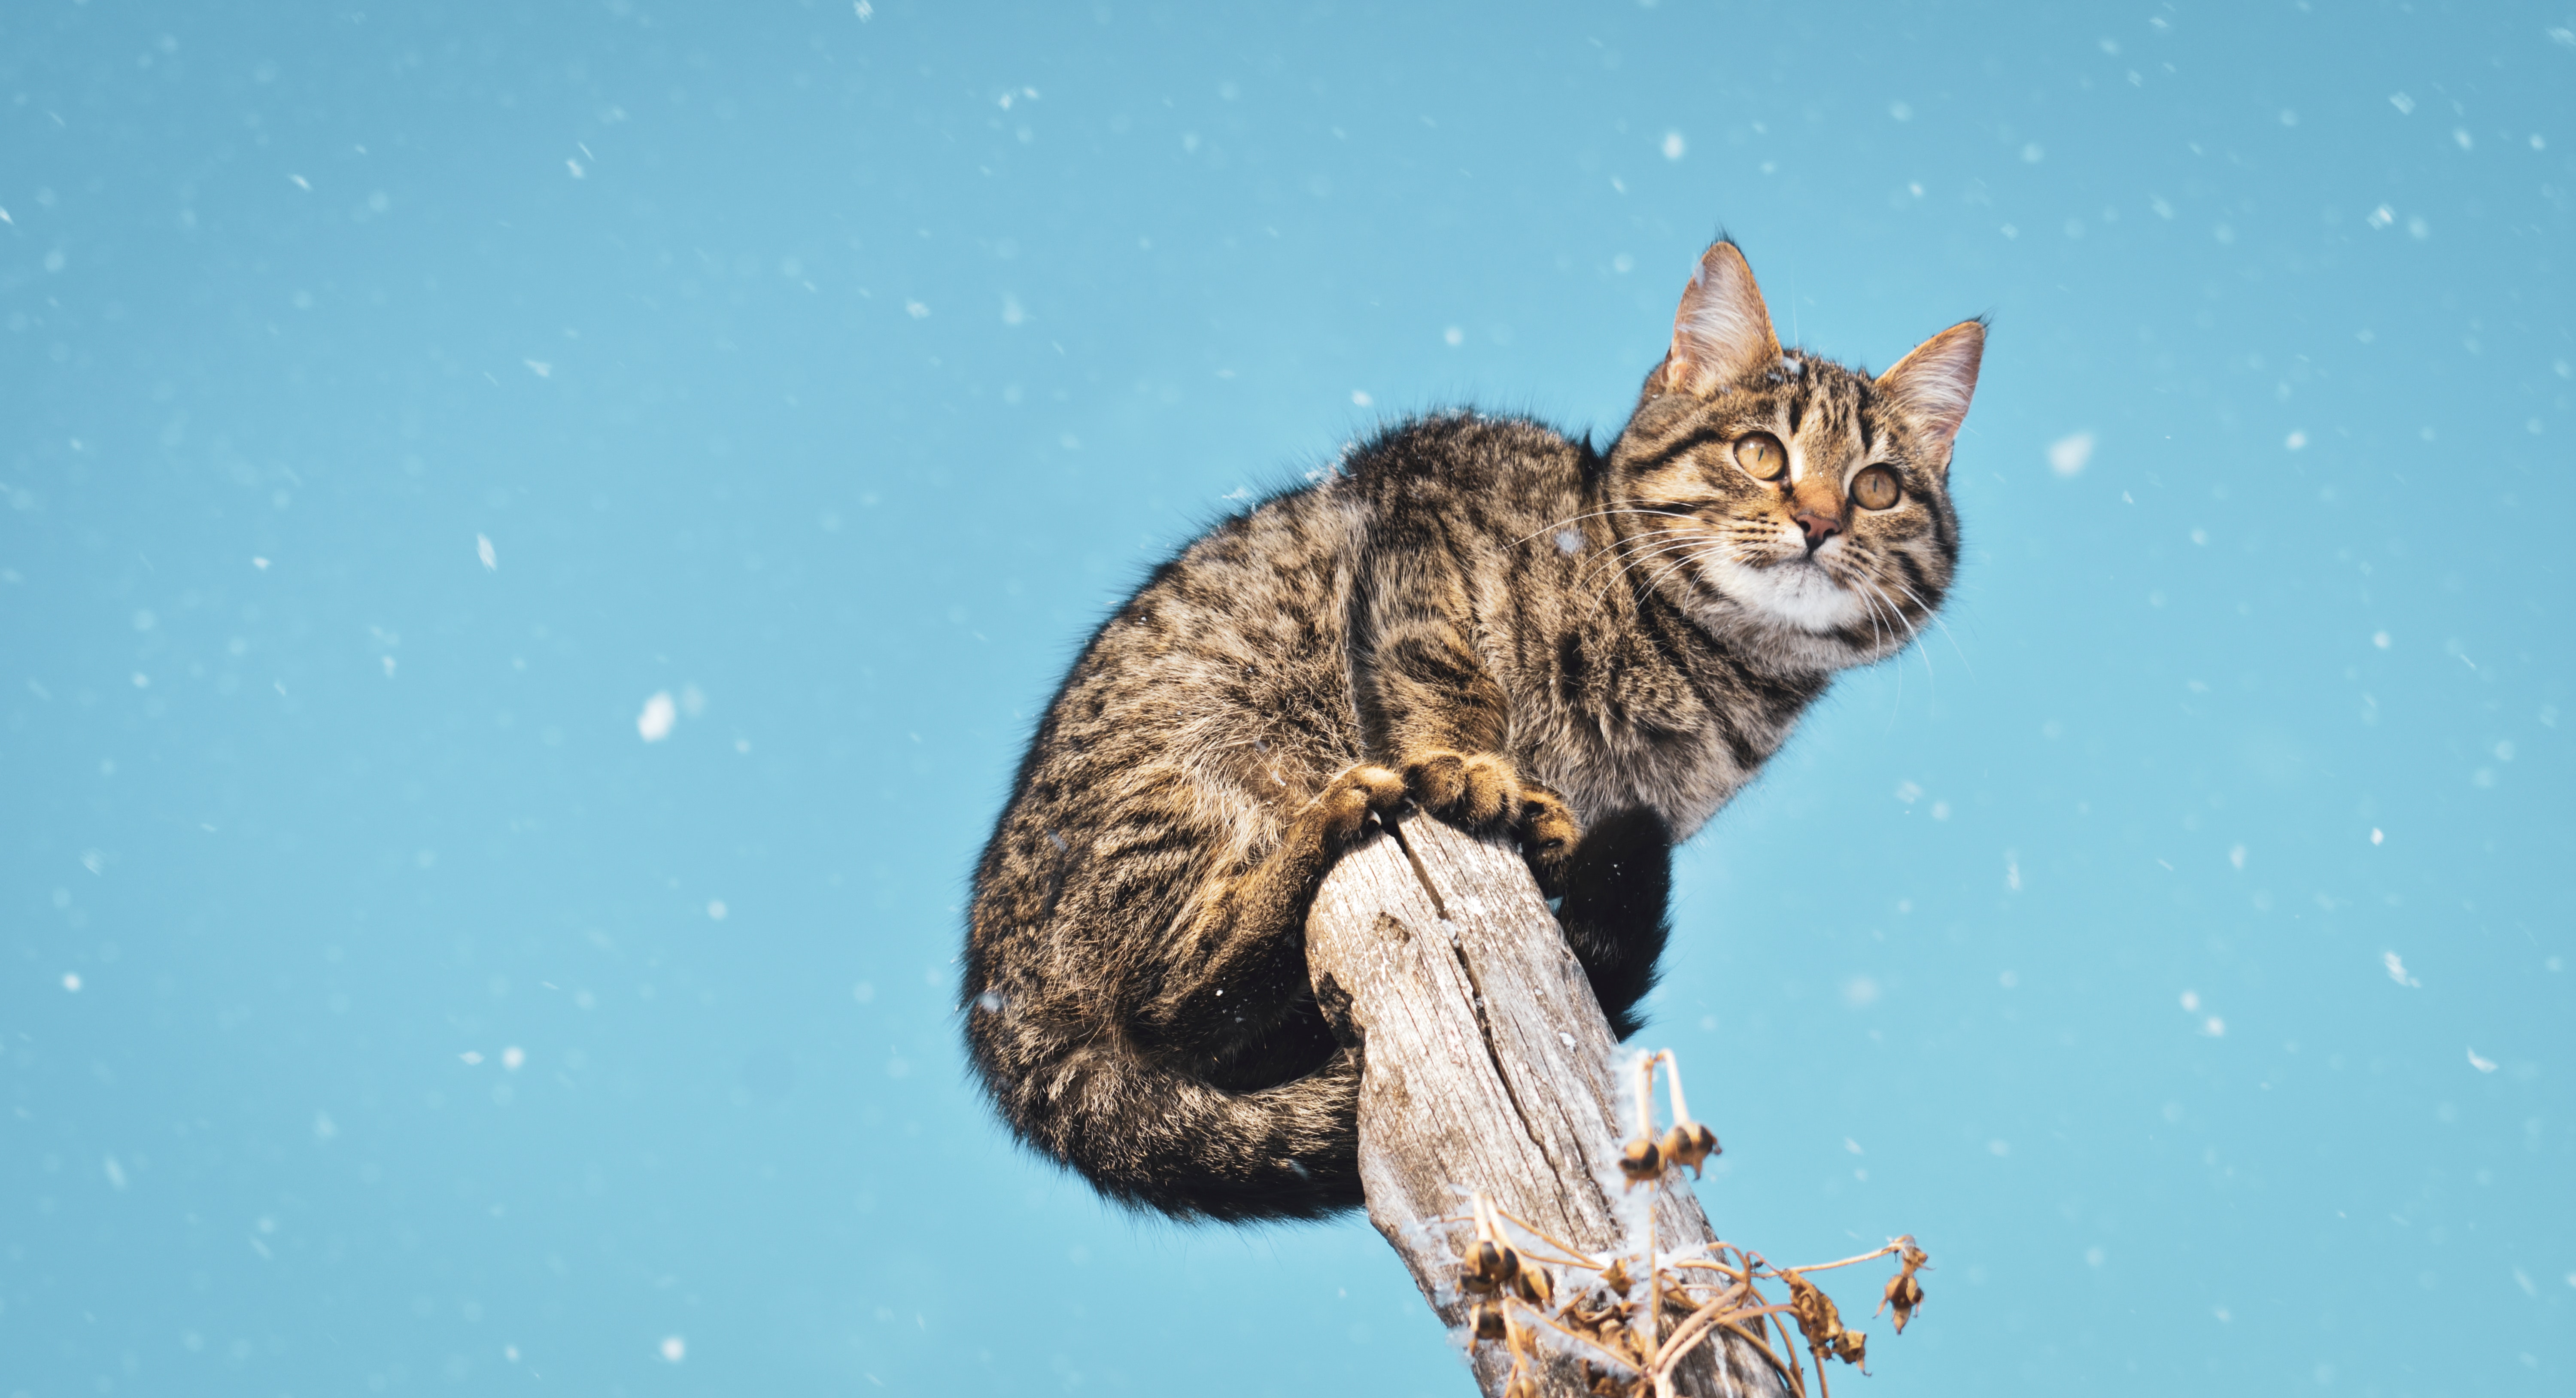 102051 download wallpaper animals, snow, cat, pillar, post, snowfall screensavers and pictures for free